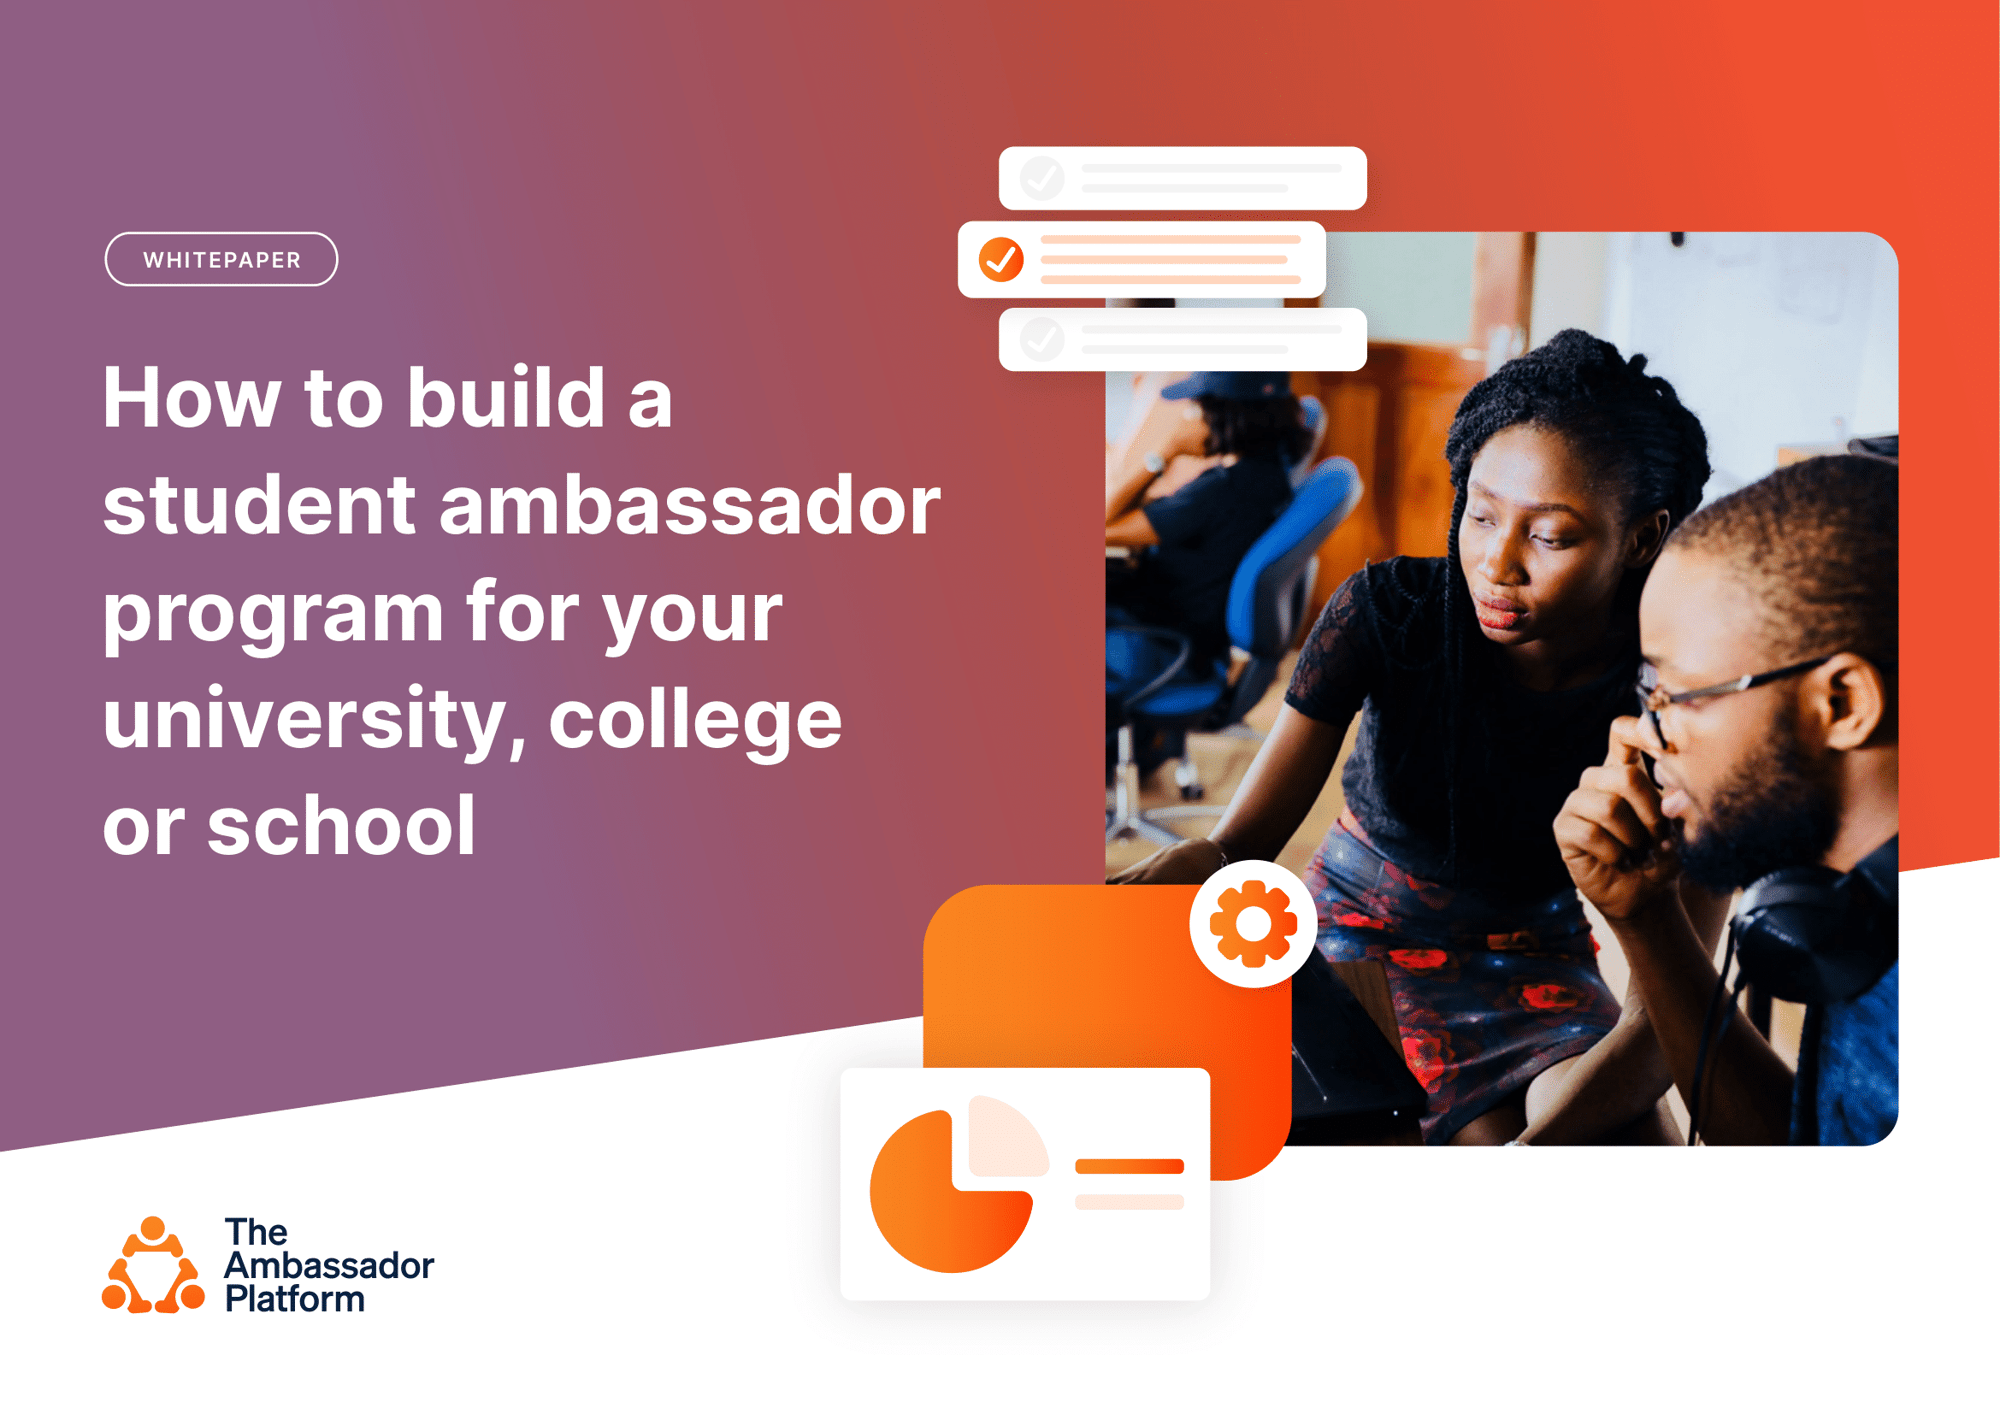 Whitepaper - How to build a student ambassador program for your university, college or school-01